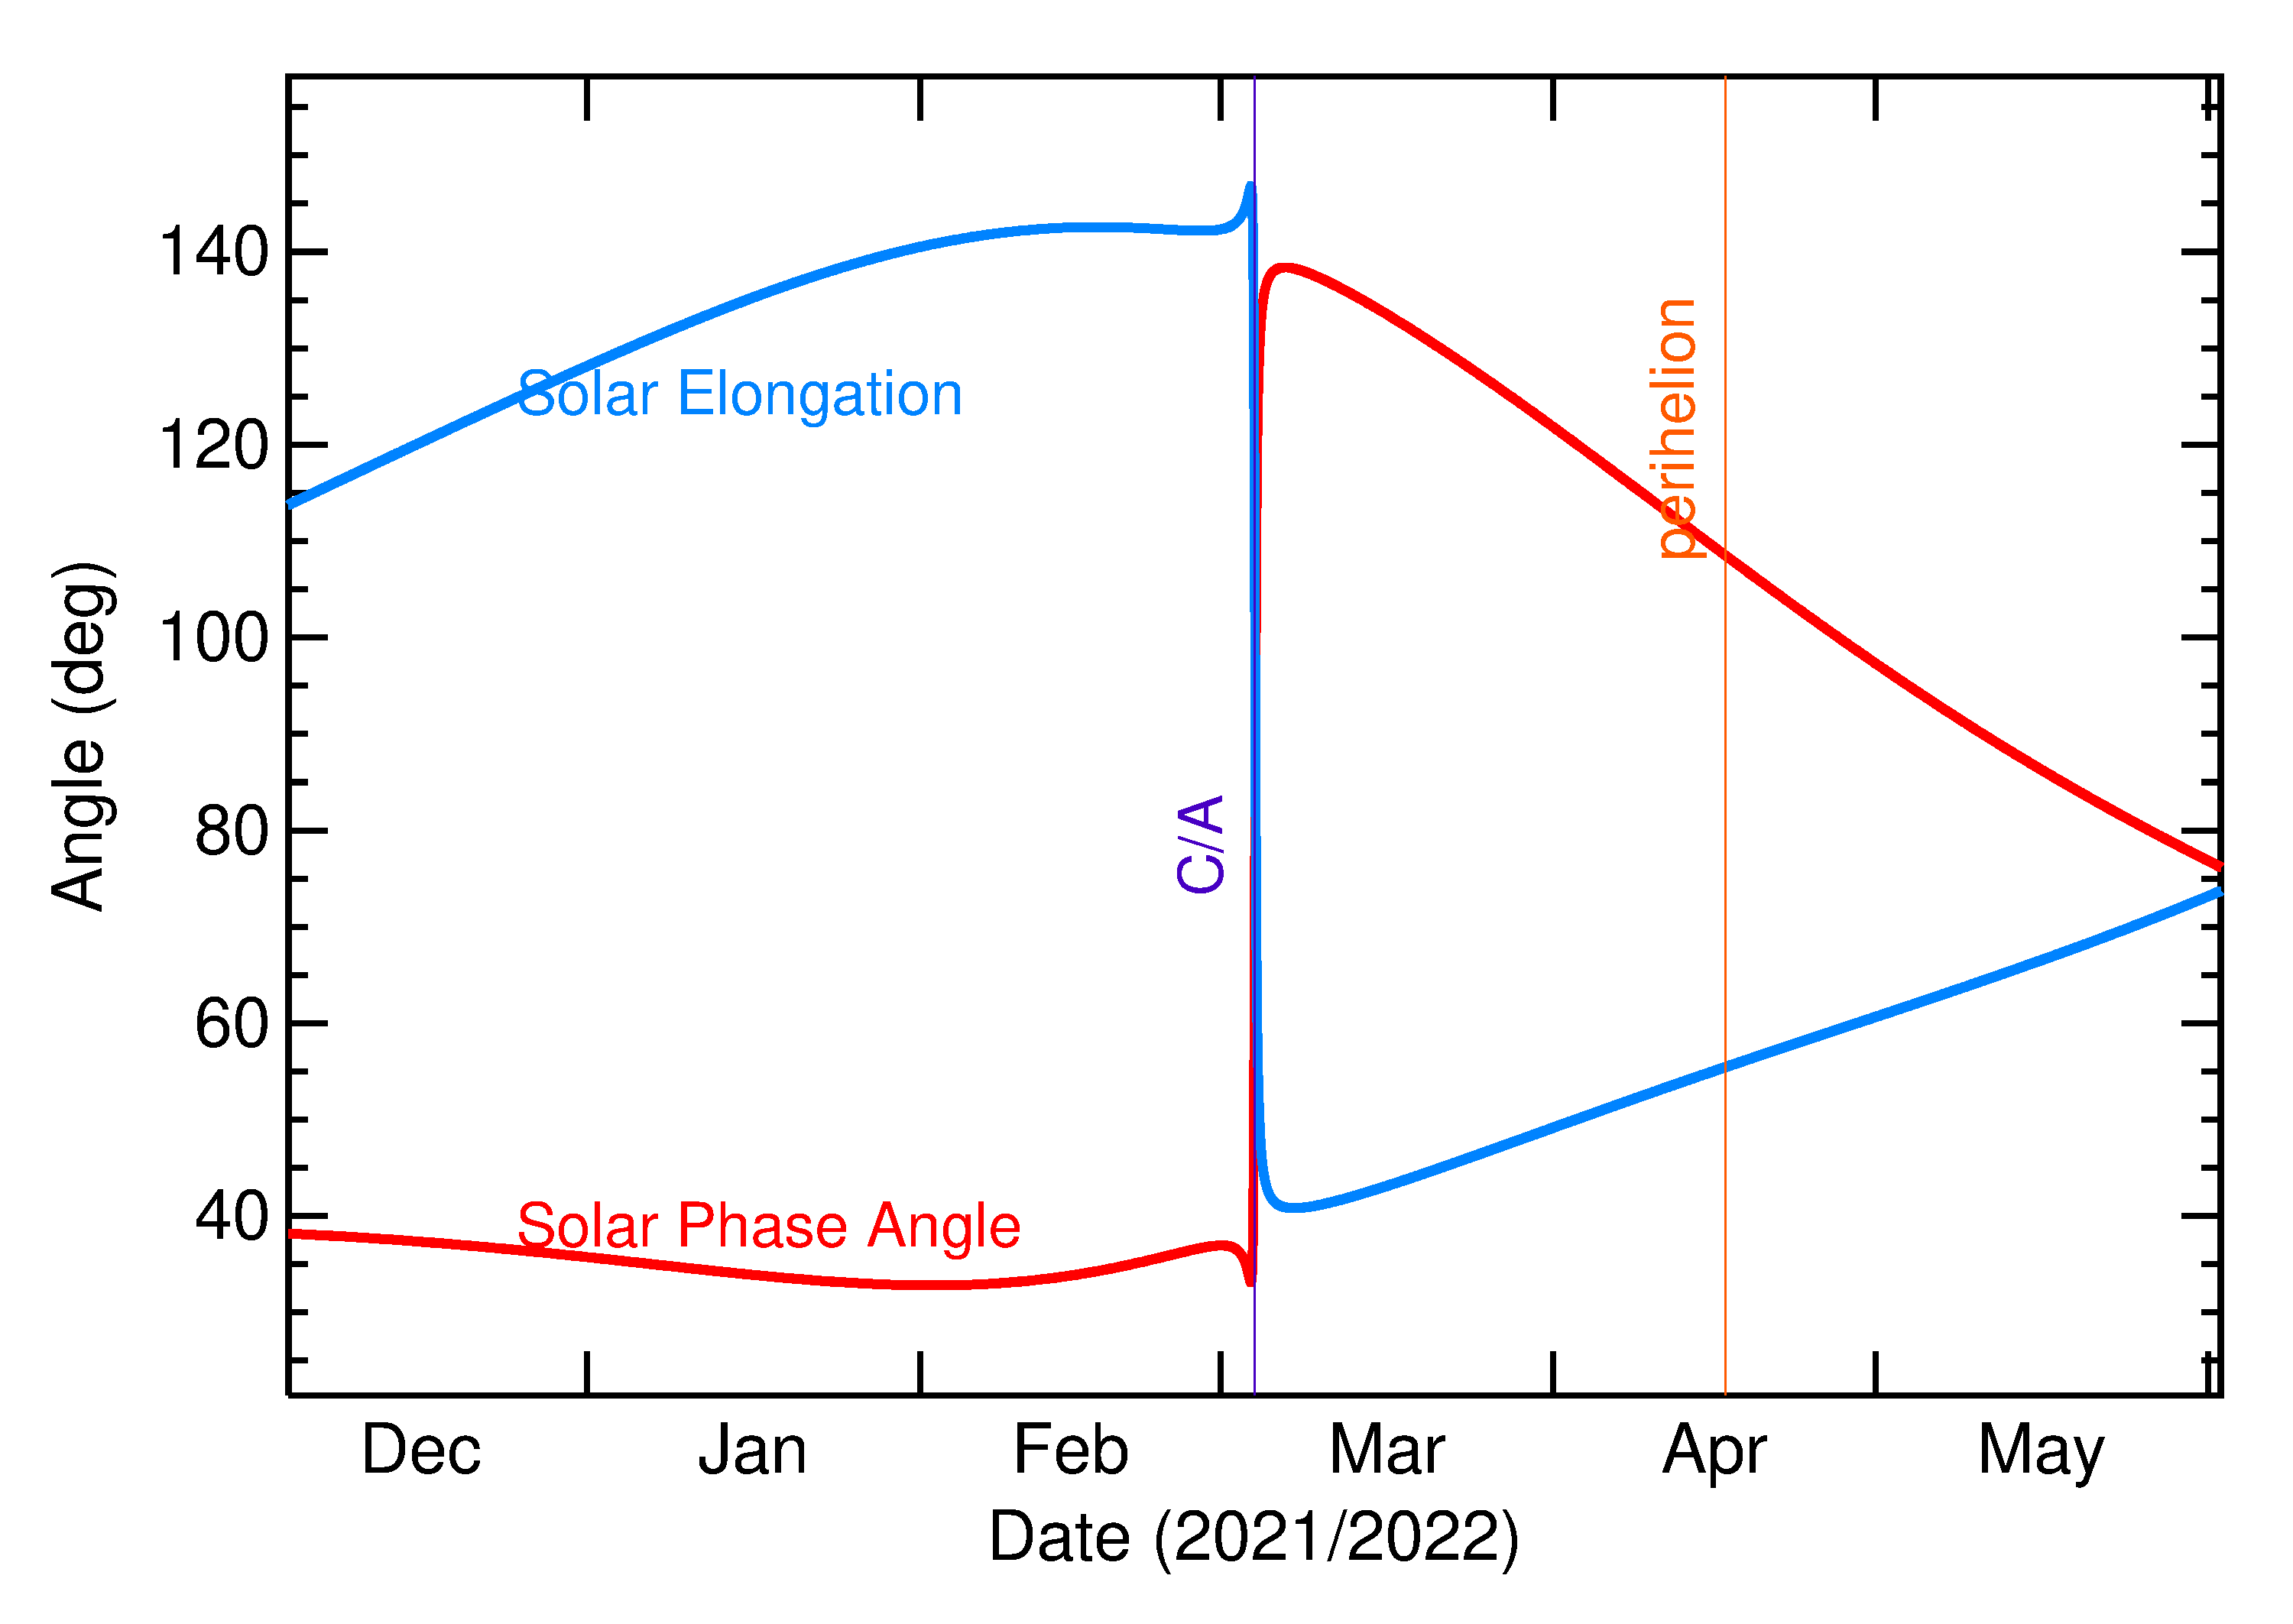 Solar Elongation and Solar Phase Angle of 2022 EQ in the months around closest approach